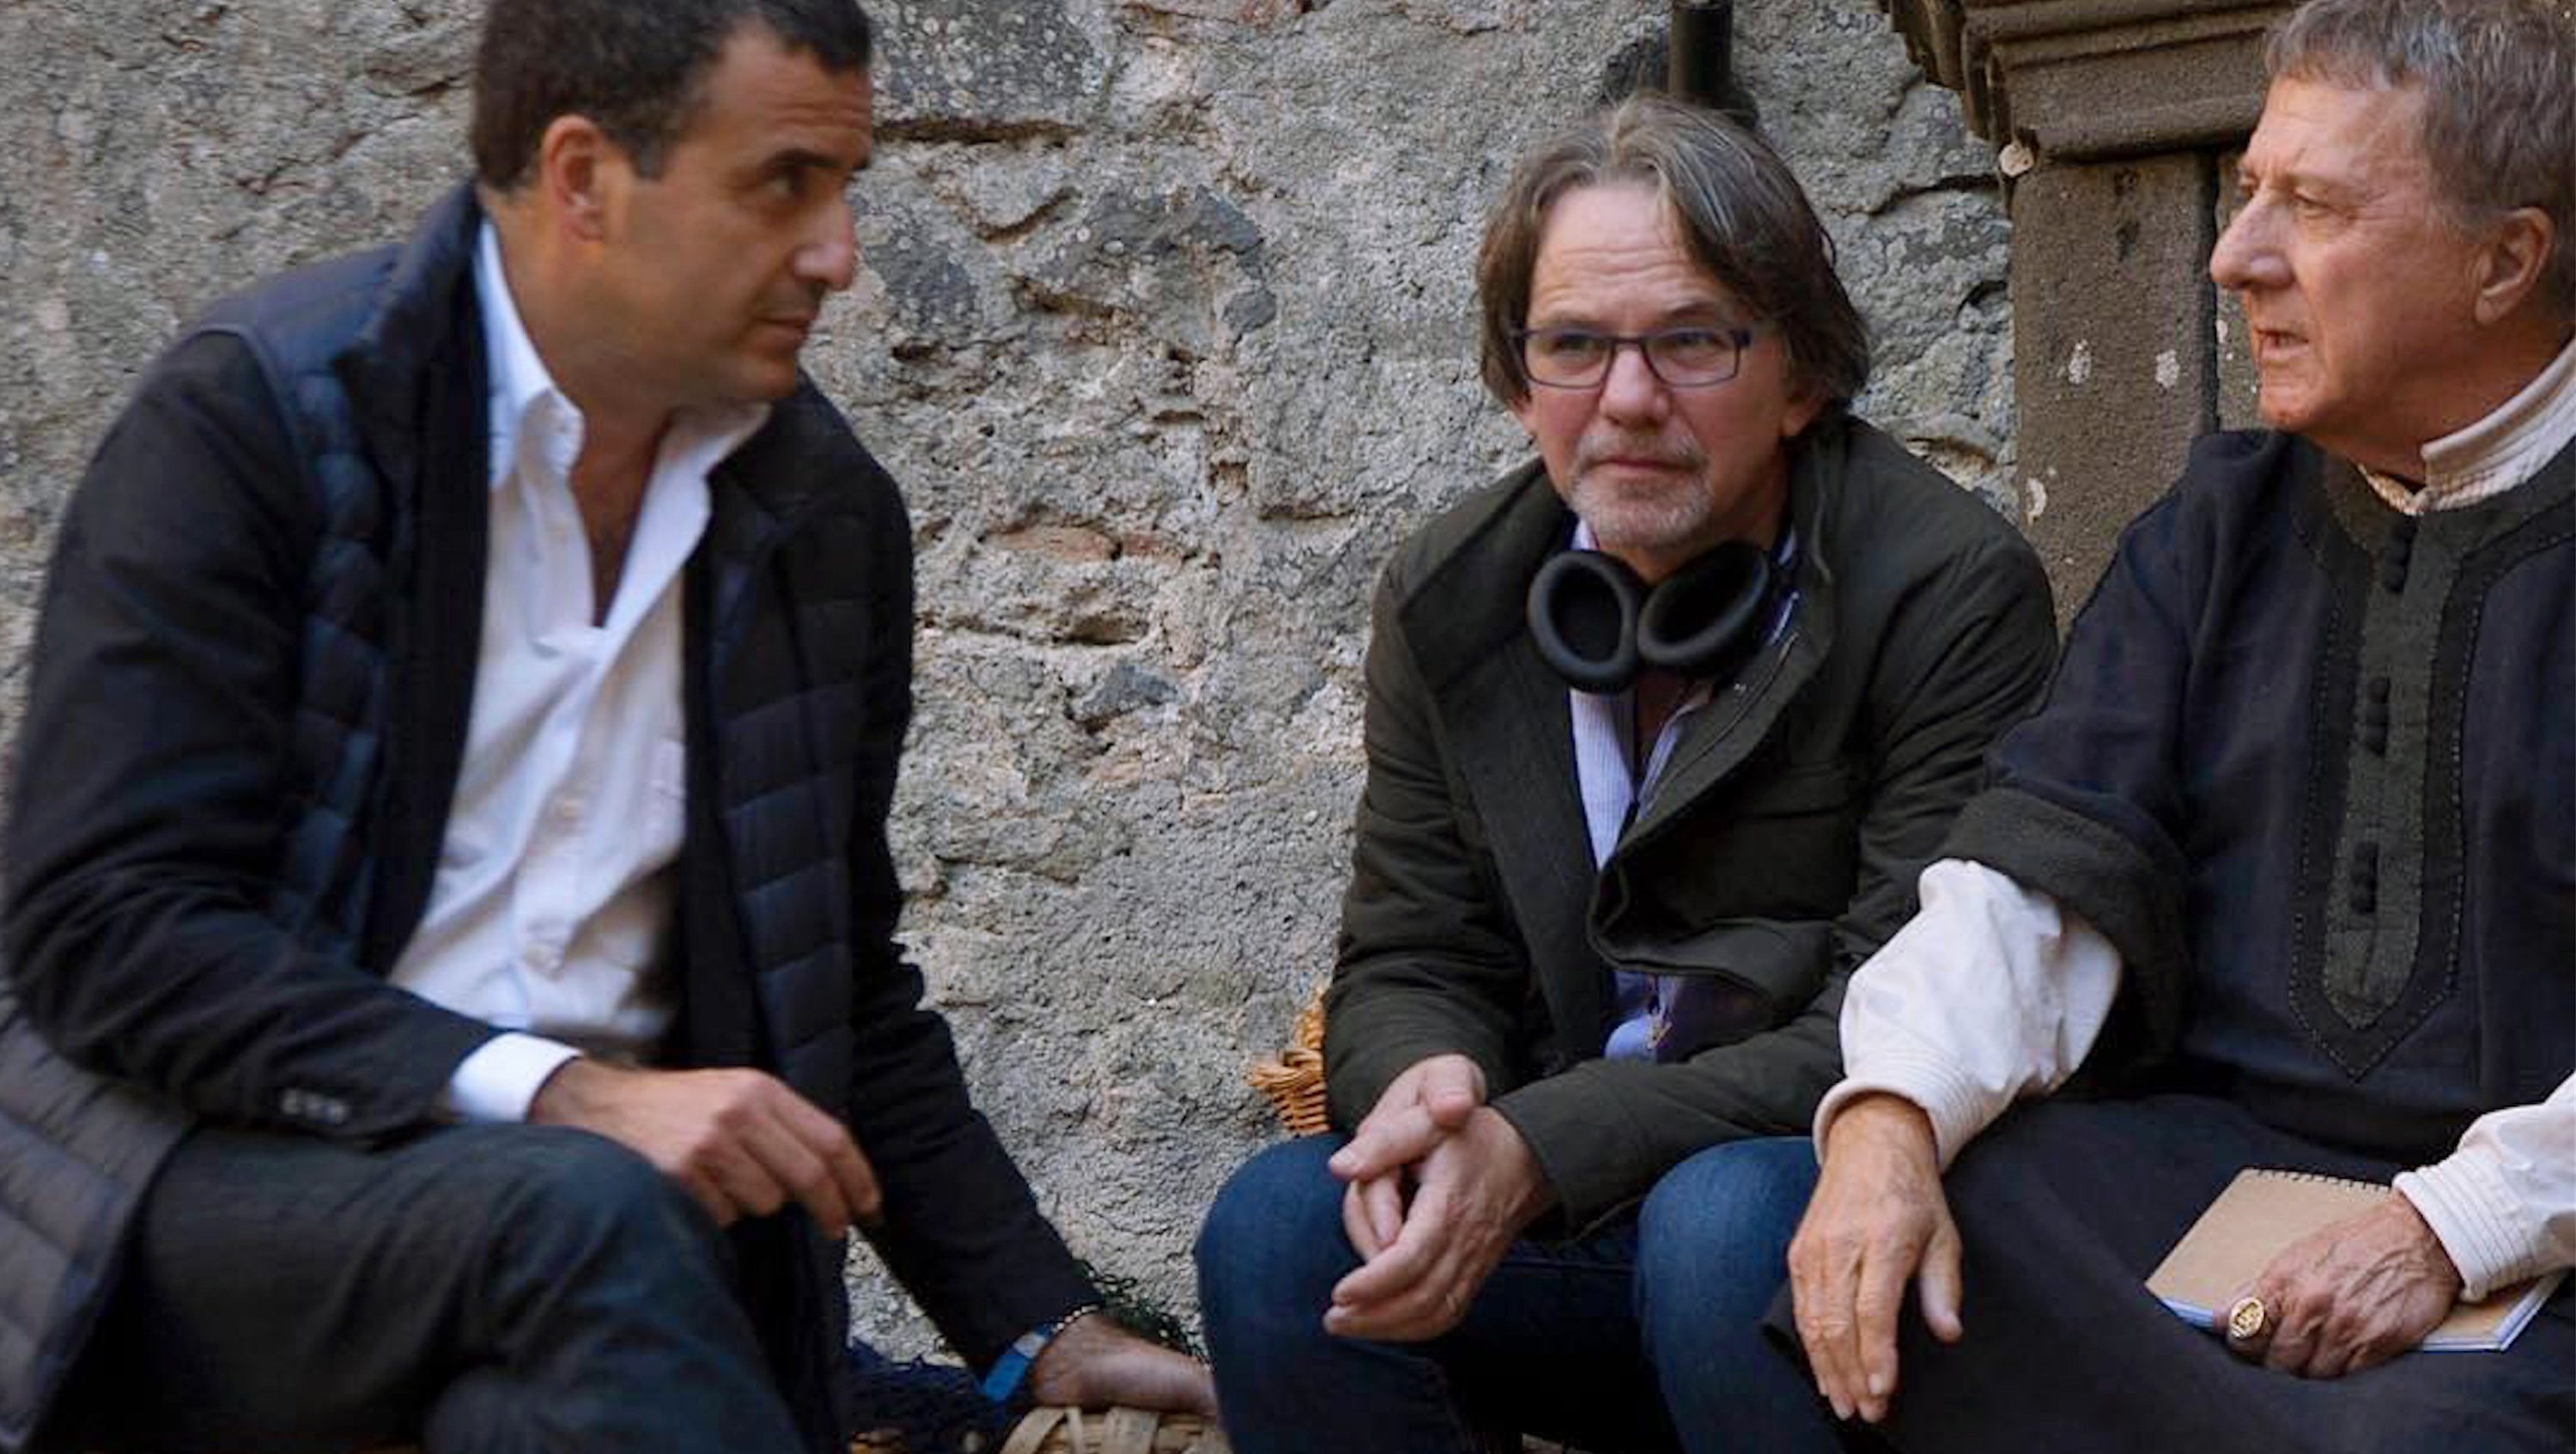 Frank Spotnitz and Dustin Hoffman on set filming Medici: Masters of Florence